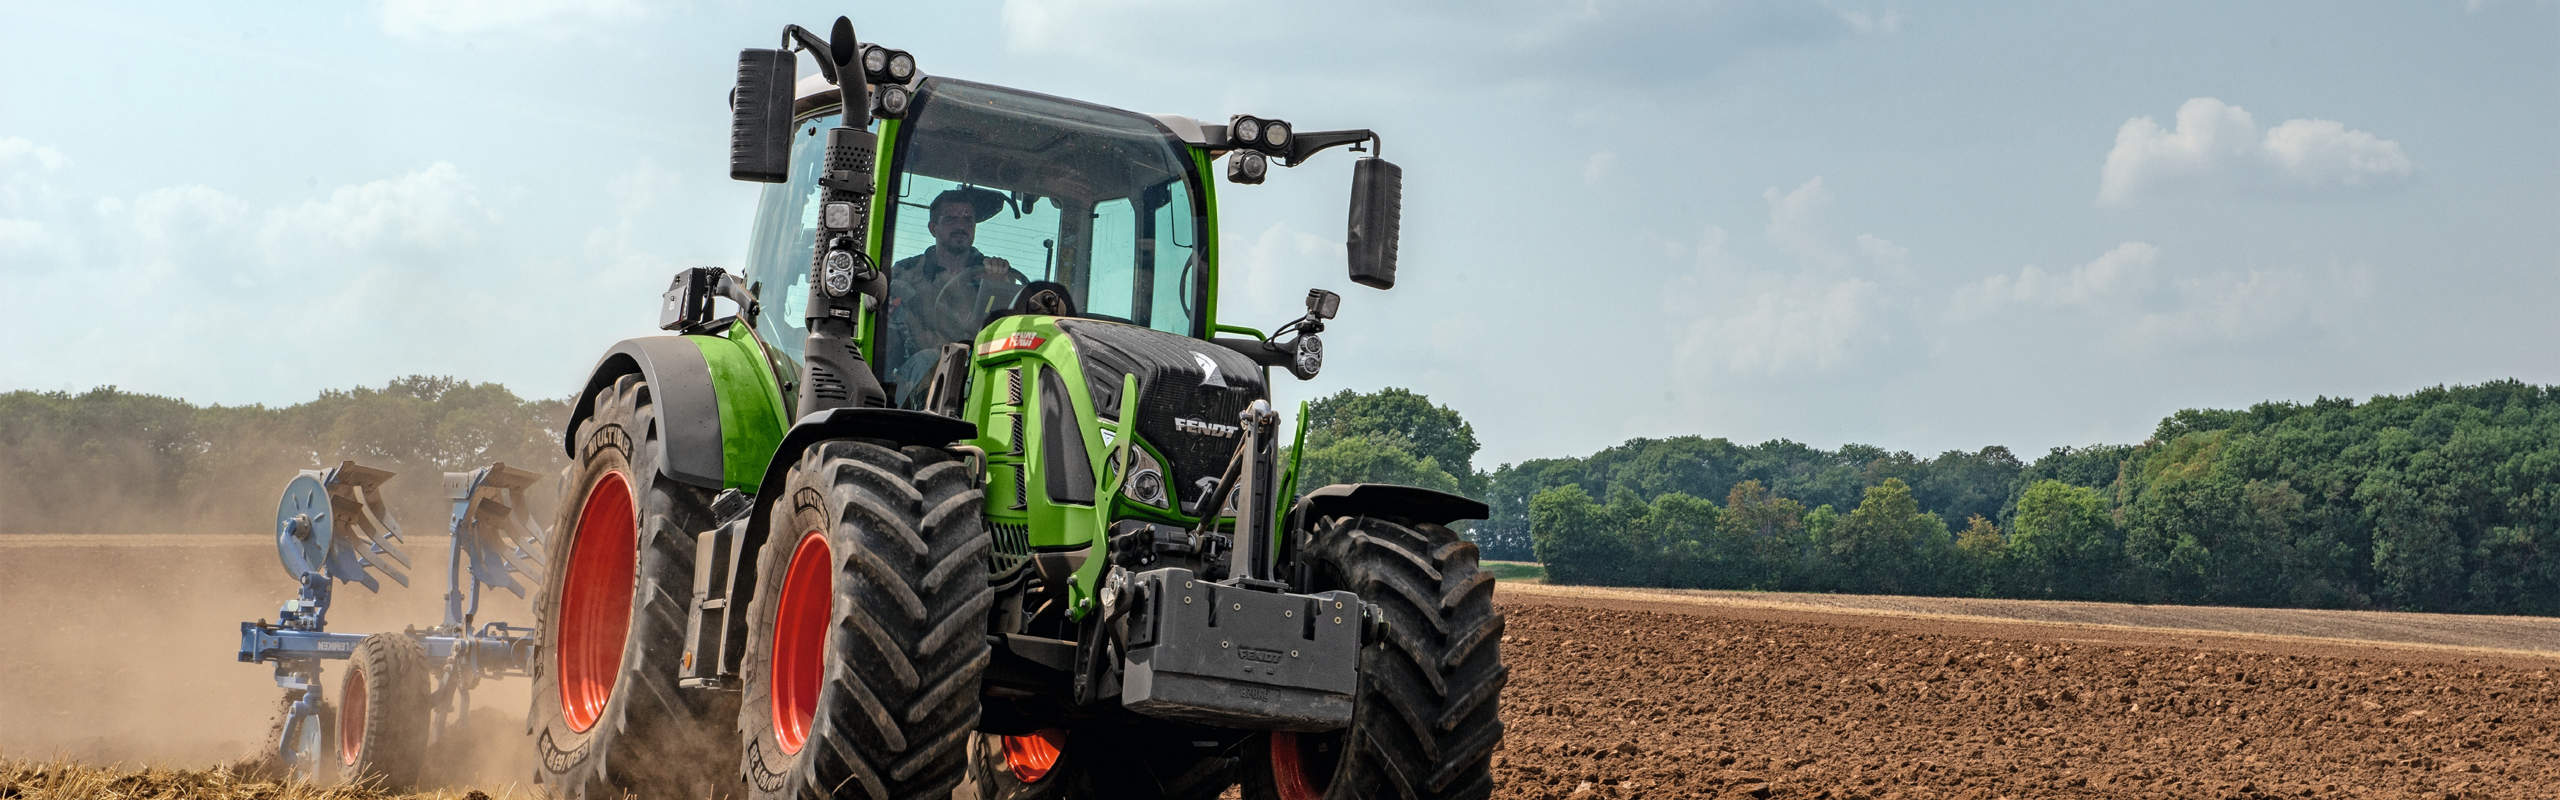 The Fendt 500 Vario with drill combination in the field.